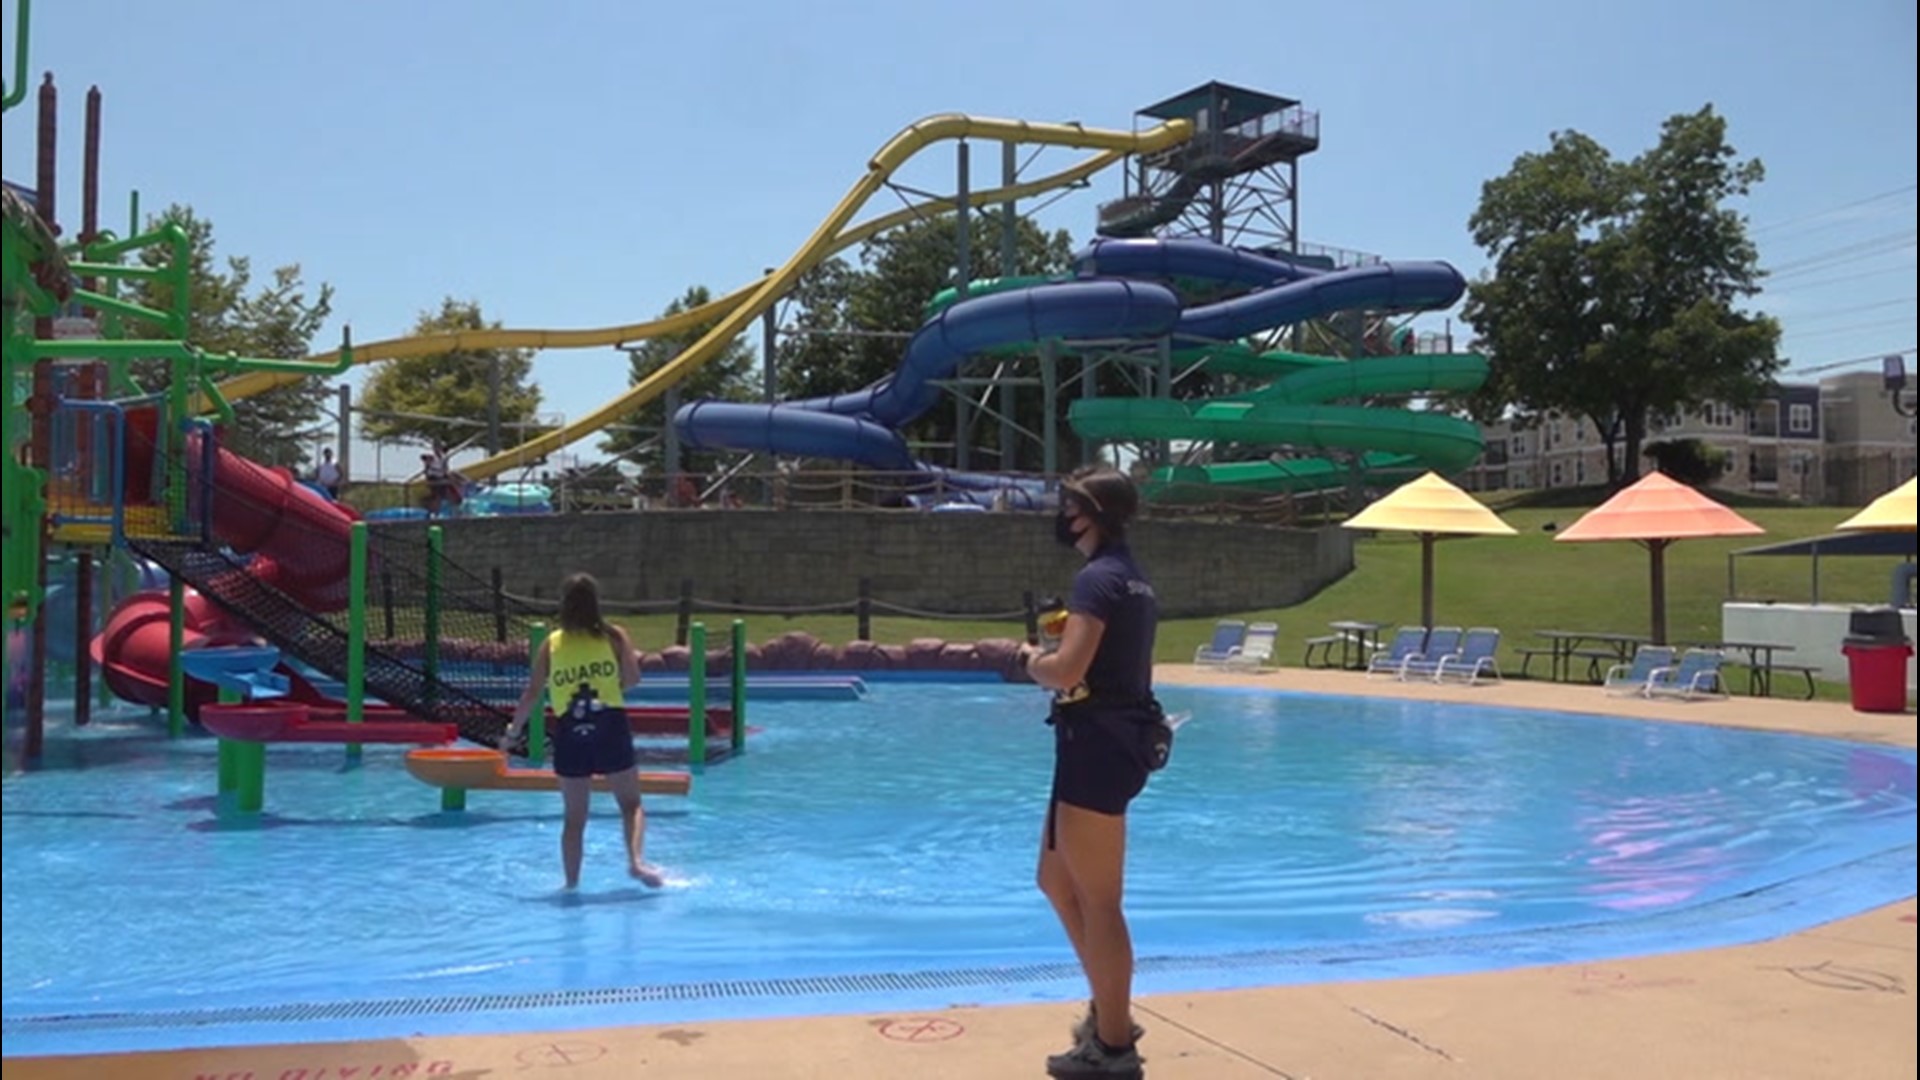 Many public pools and splashpads are closed this summer, but some waterparks are adjusting to reopen and follow COVID-19 safety guidelines.